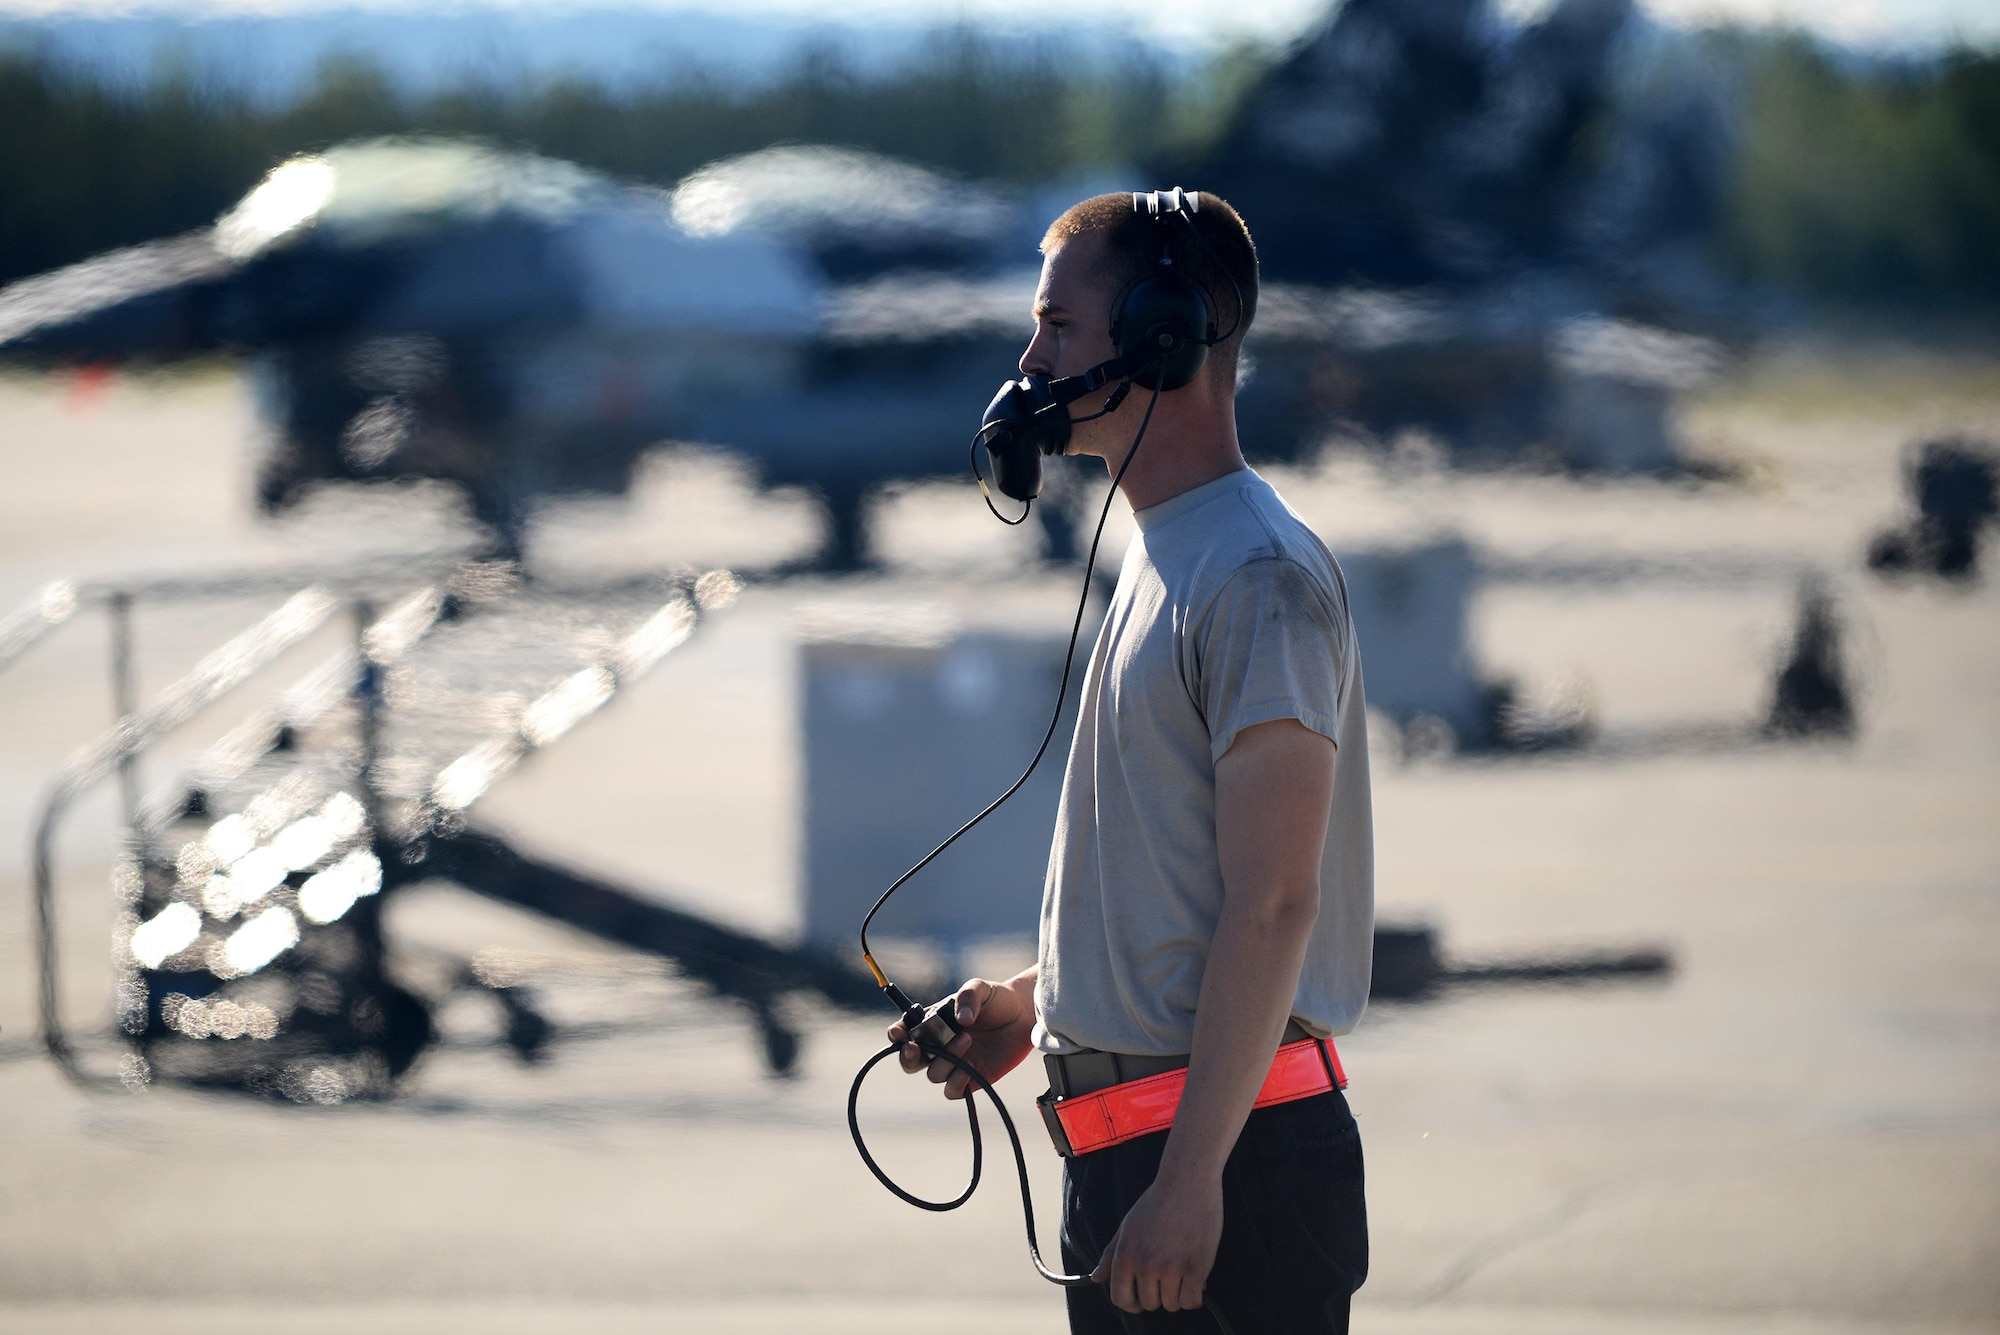 U.S. Air Force Airman 1st Class Michael Brinkmeyer, an F-16 Fighting Falcon assistant dedicated crew chief with the18th Aircraft Maintenance Unit, completes final checks with the pilot during RED FLAG-Alaska 16-2, on Eielson Air Force Base, Alaska, June 15, 2016. (U.S. Air Force photo by Tech. Sgt. Steven R. Doty)